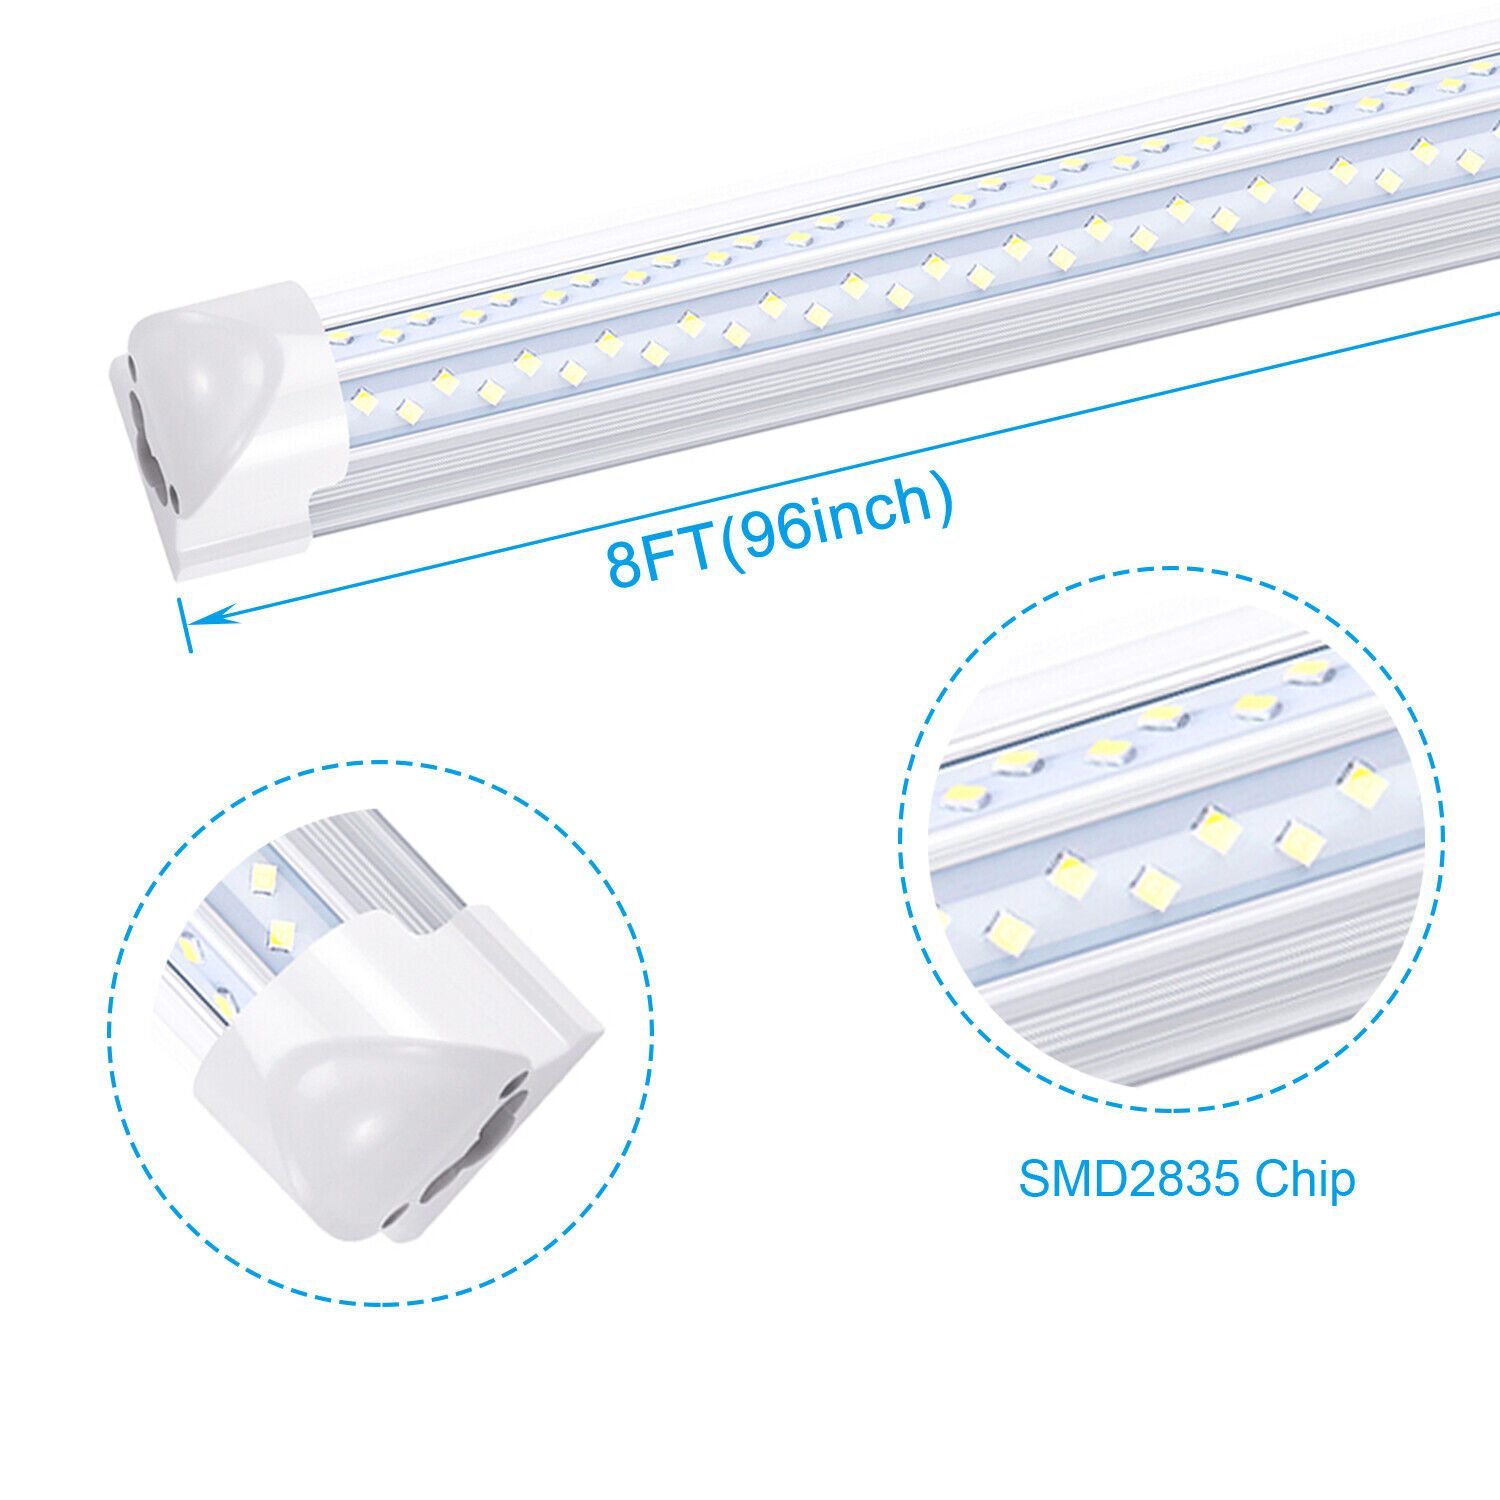 10Pack 8Foot 120W Led Light Bulbs 8FT Led Shop Light Fixture Strip Ceiling Light Unbranded Does not apply - фотография #2